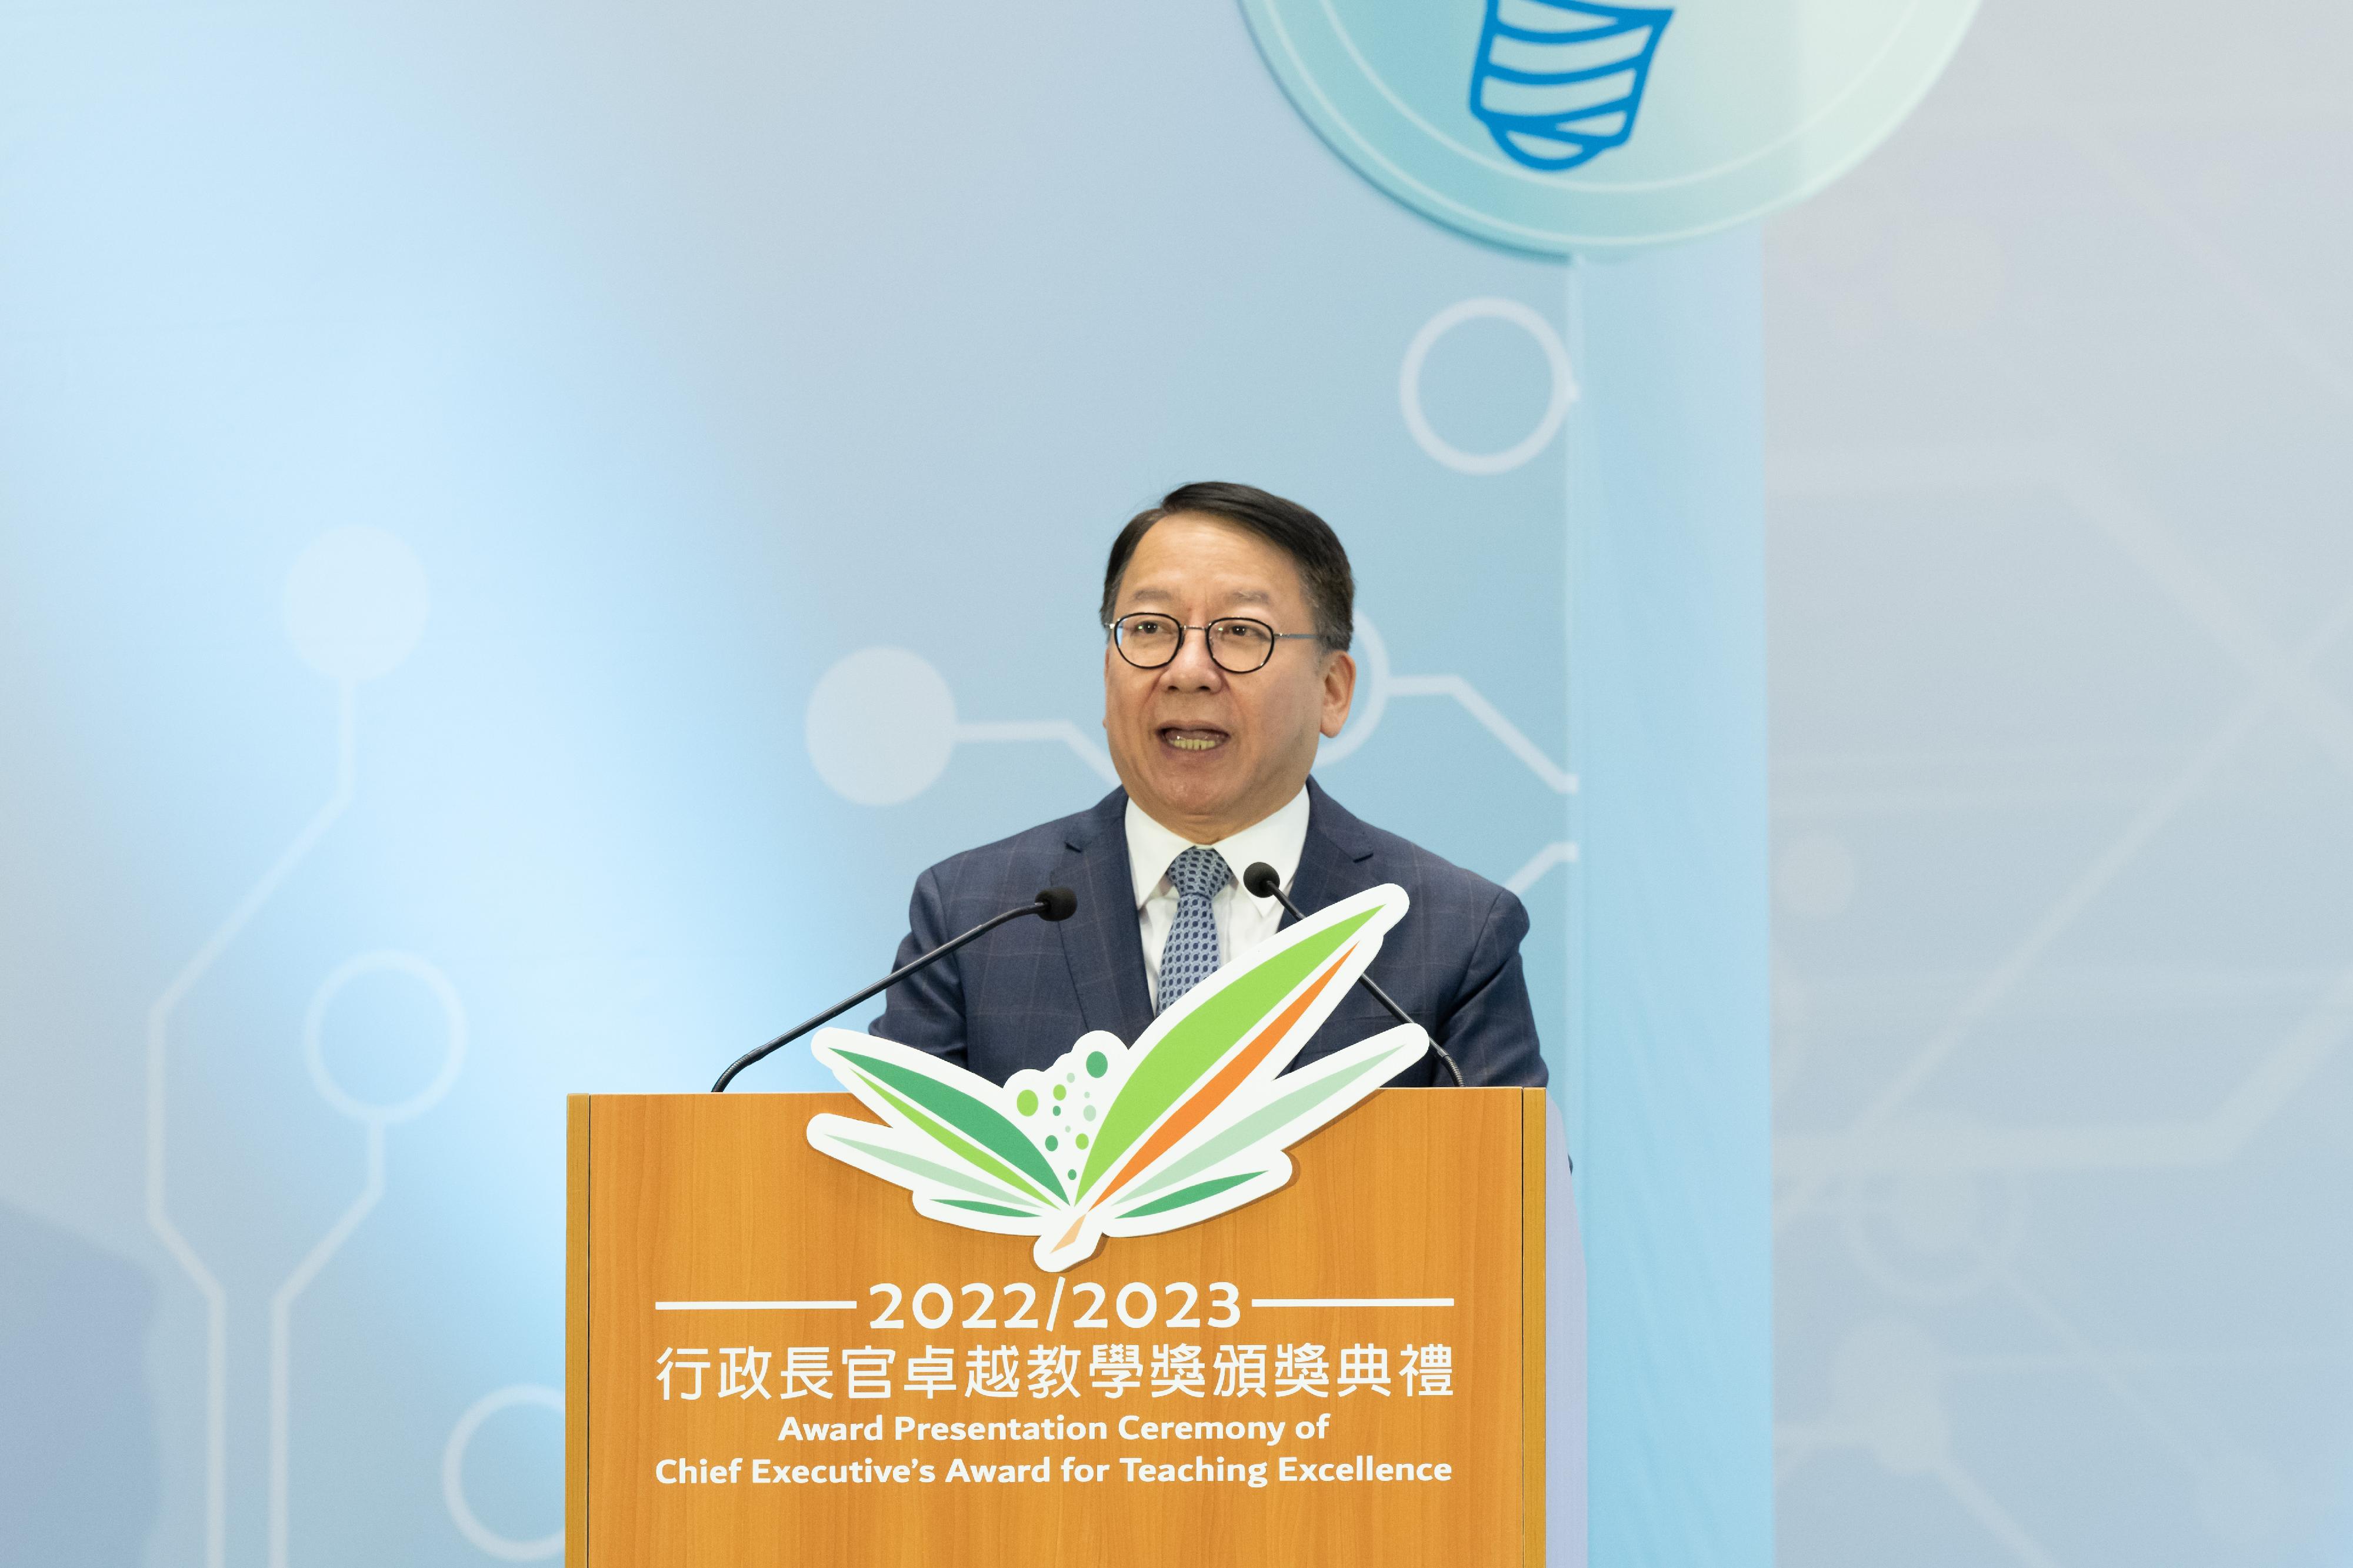 The Acting Chief Executive, Mr Chan Kwok-ki, speaks at the Award Presentation Ceremony of the Chief Executive's Award for Teaching Excellence (2022/2023) today (July 7). 